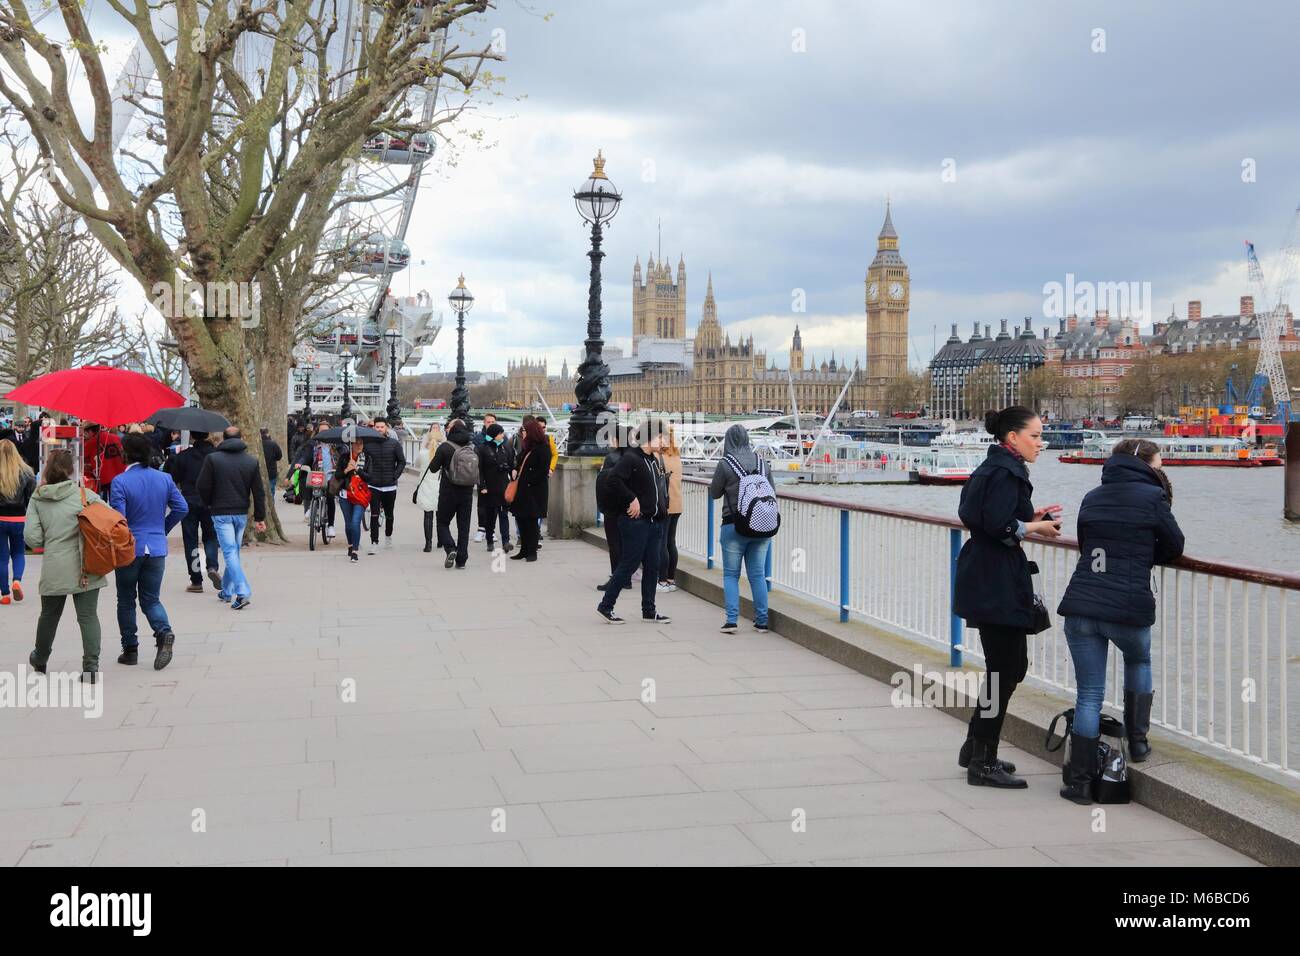 LONDON, UK - APRIL 23, 2016: People visit Thames Embankment in London, UK. London is the most populous city in the UK with 13 million people living in Stock Photo